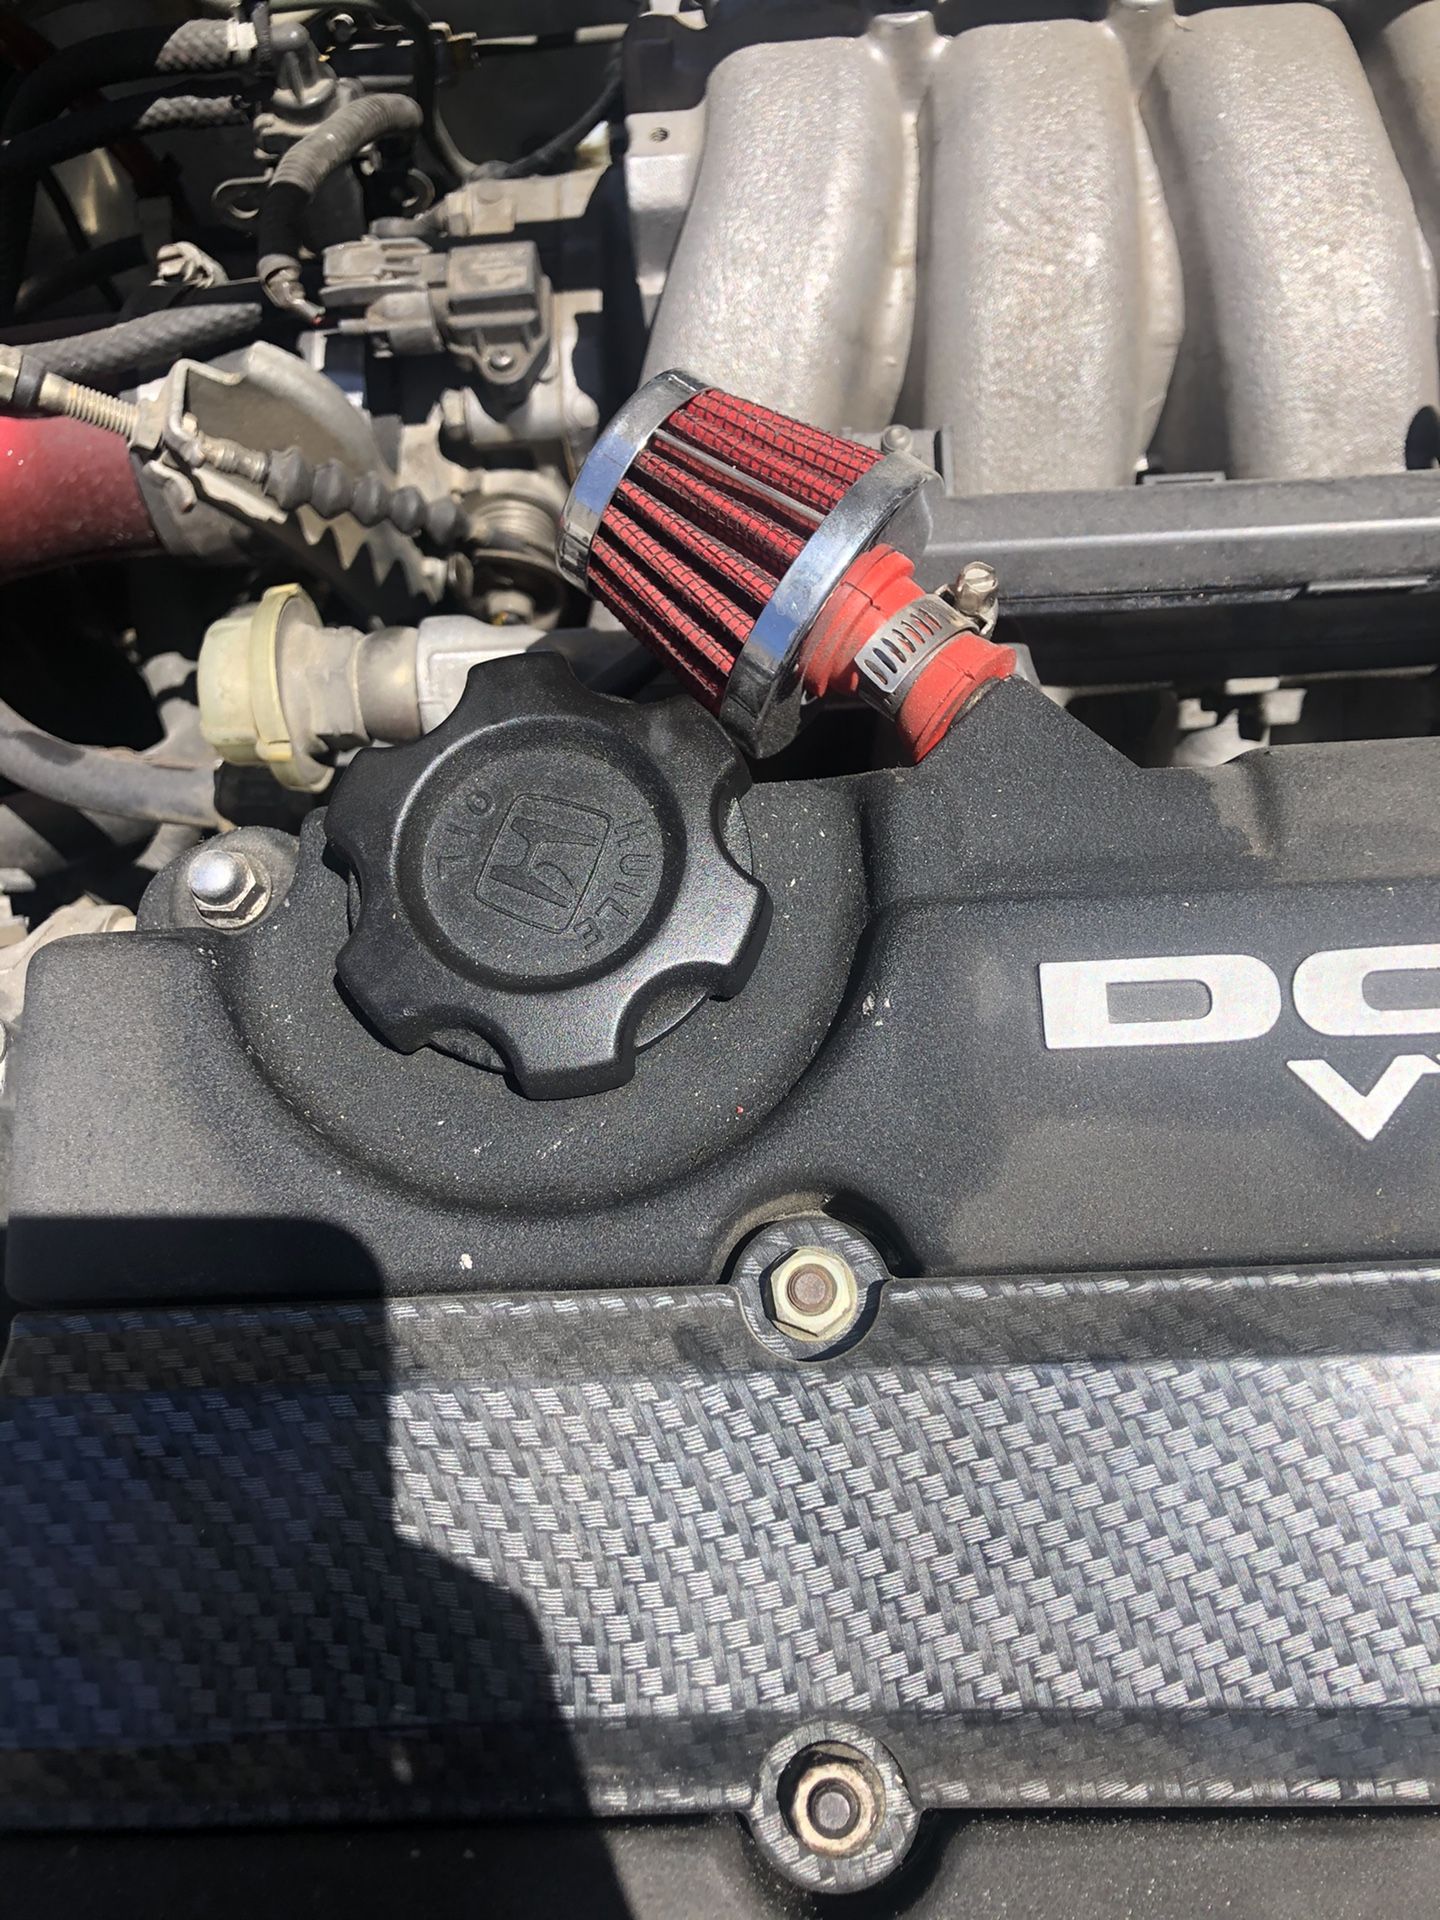 Valve cover breather / air filter